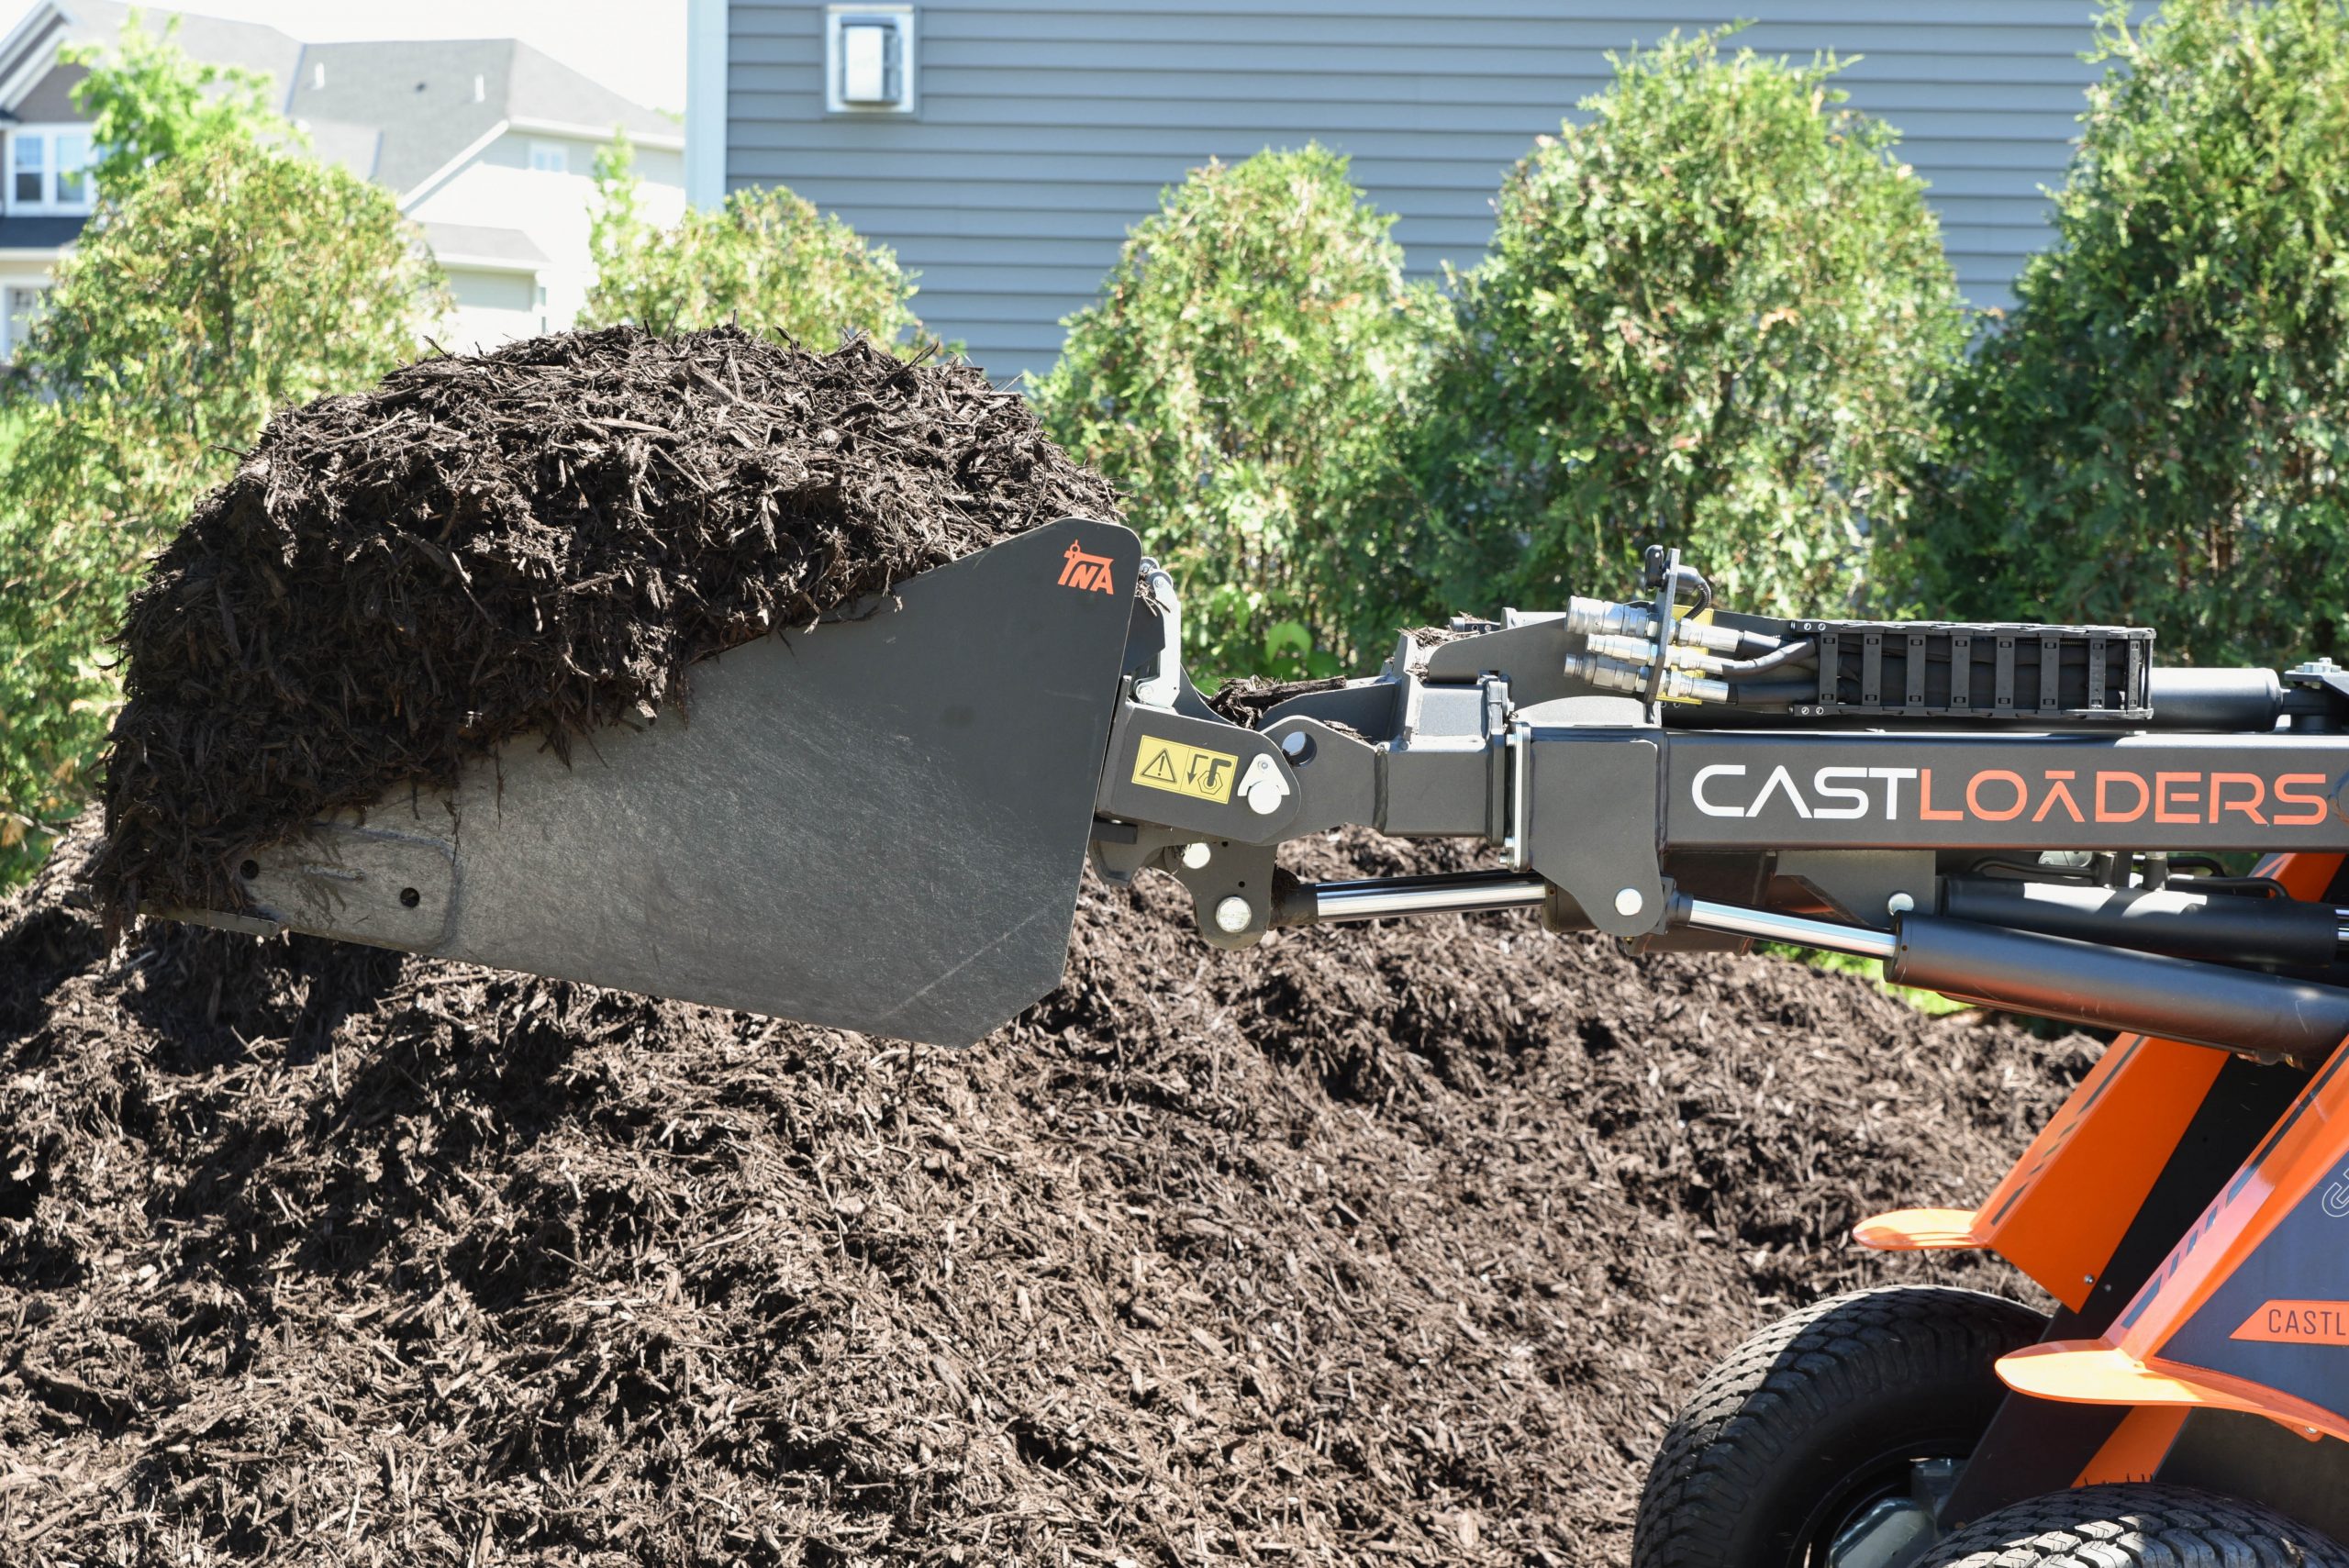 Cast Loaders are great with mulch jobs